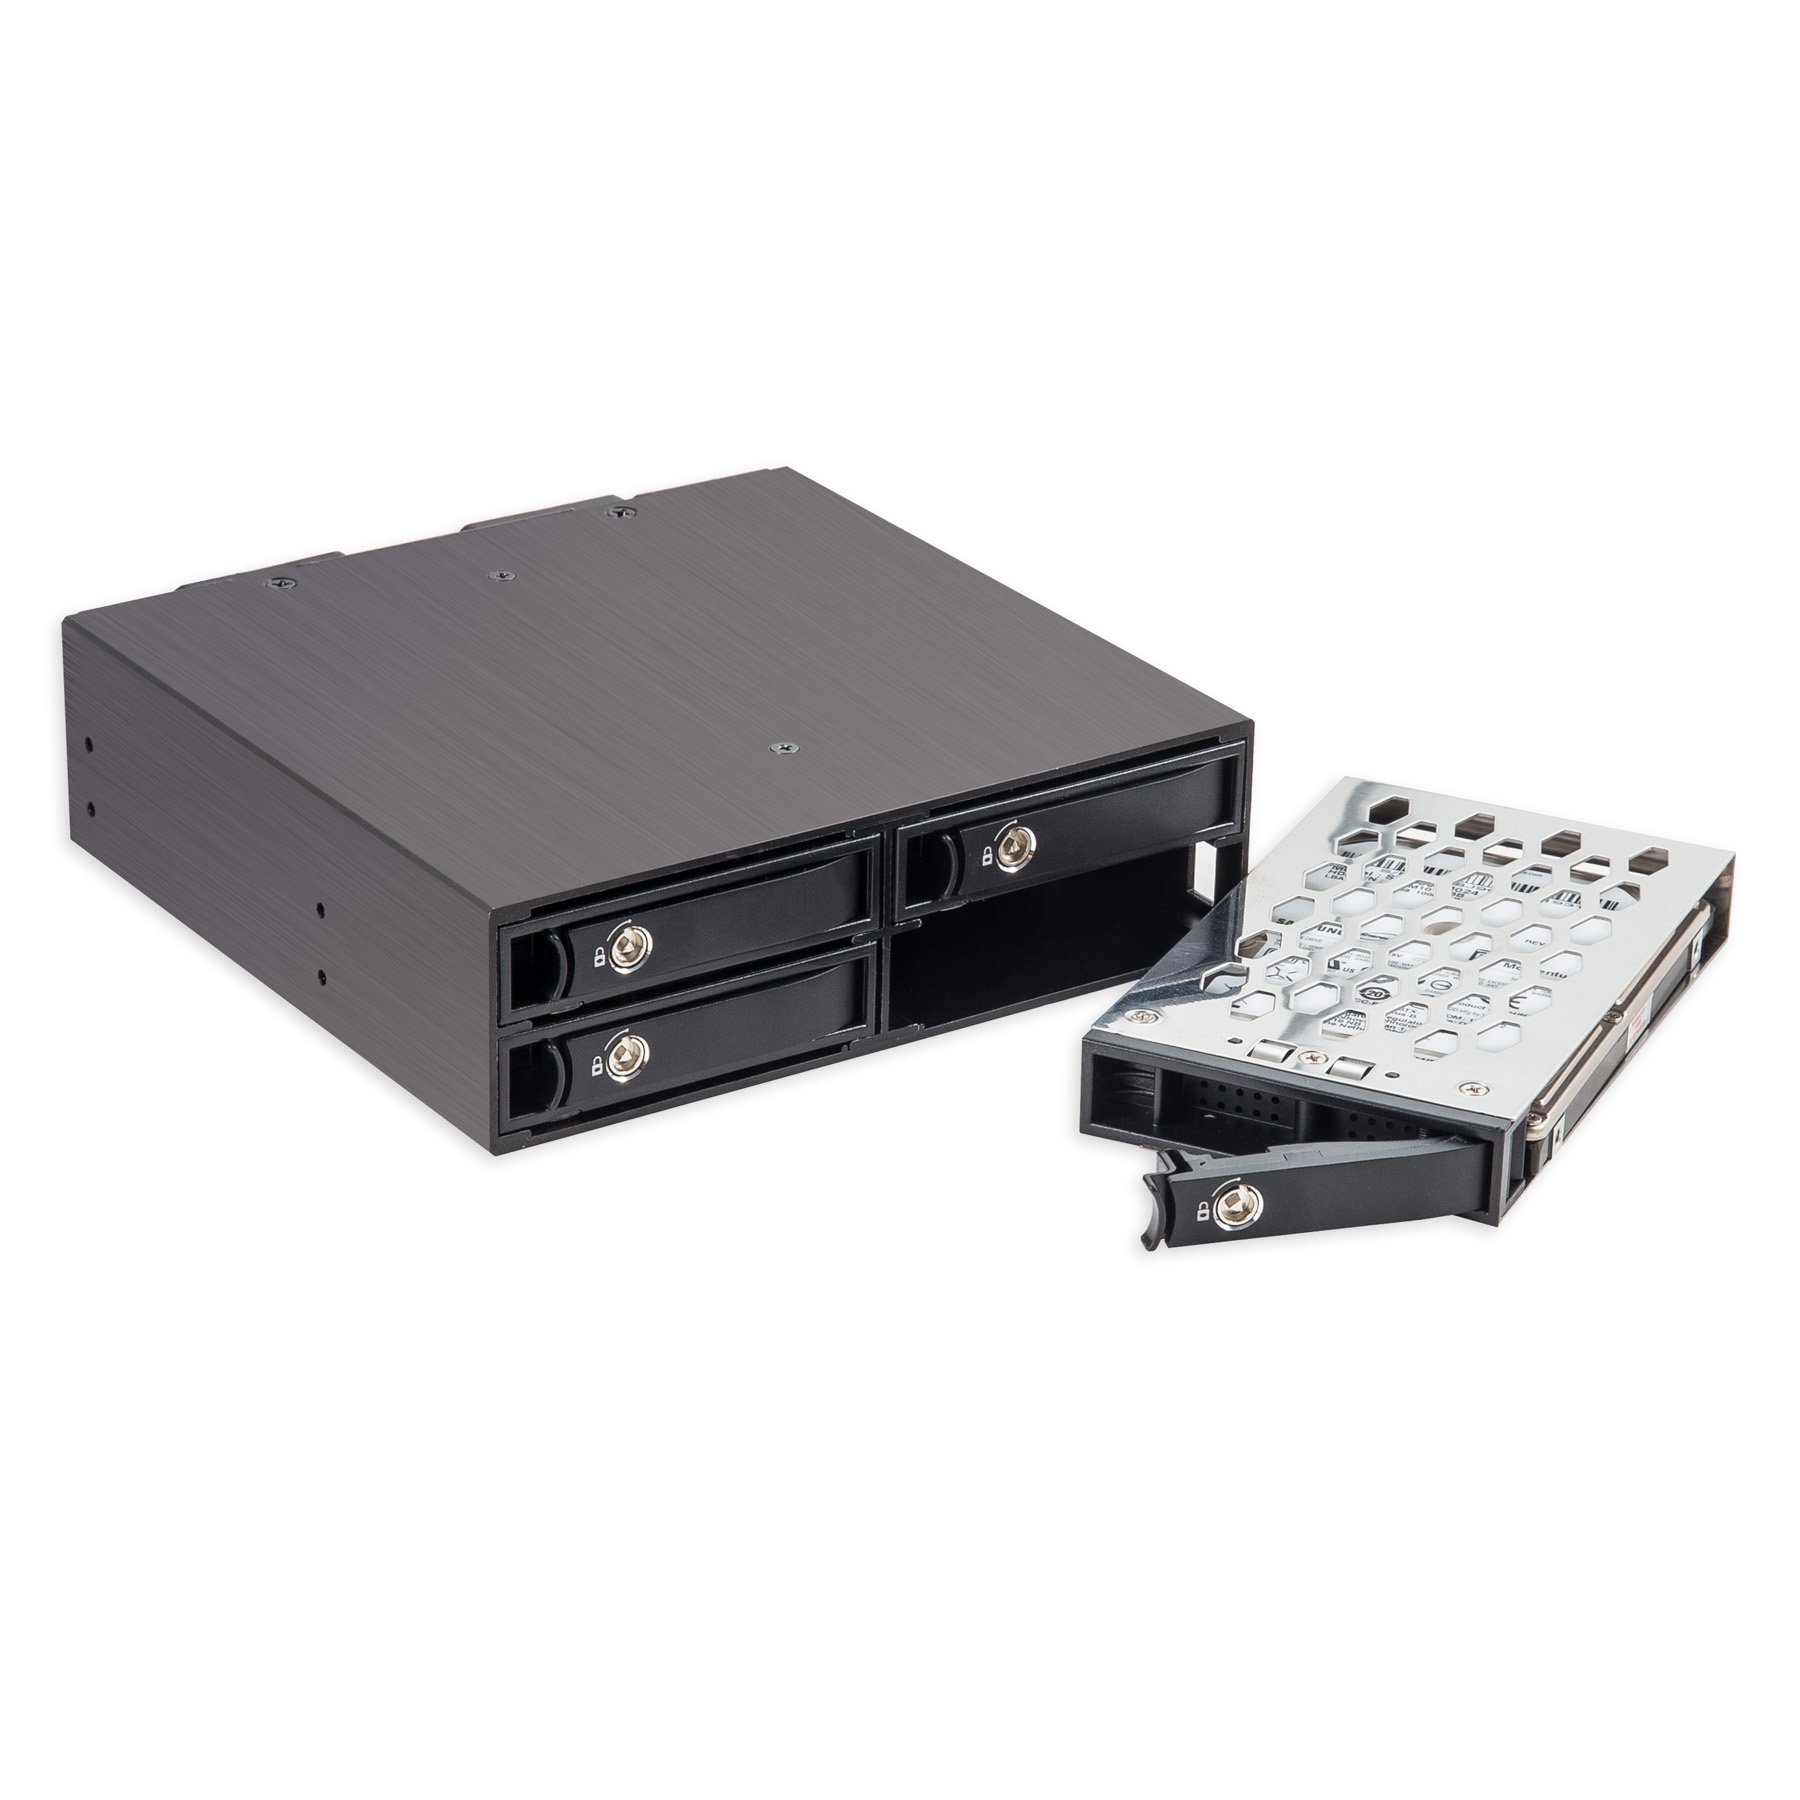 Syba 4 Bay 2.5” SATA Hard Drive Mobile Rack Mount for 5.25" Drive Bays, for HDD SSD SY-MRA25038